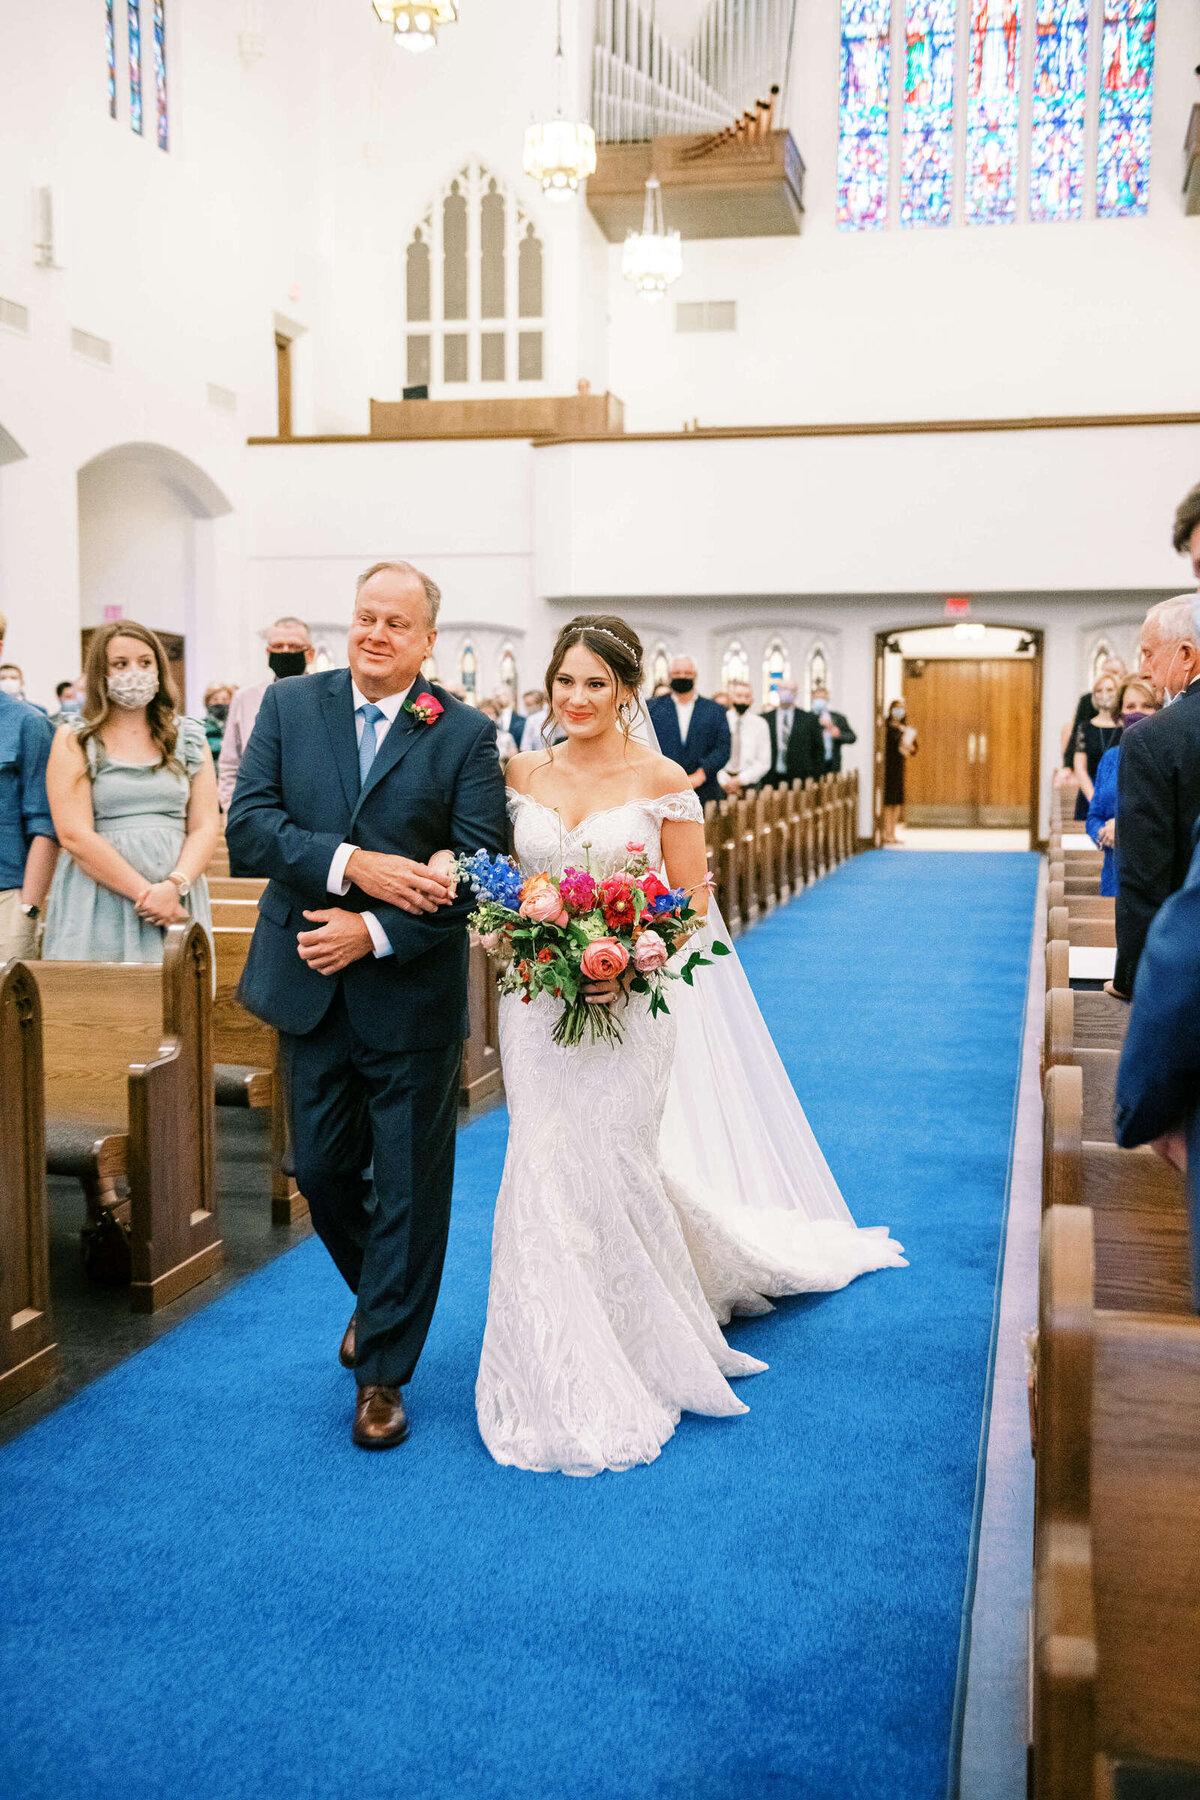 Father of the bride and bride walk down aisle at The 4Eleven venue with colorful bouquet